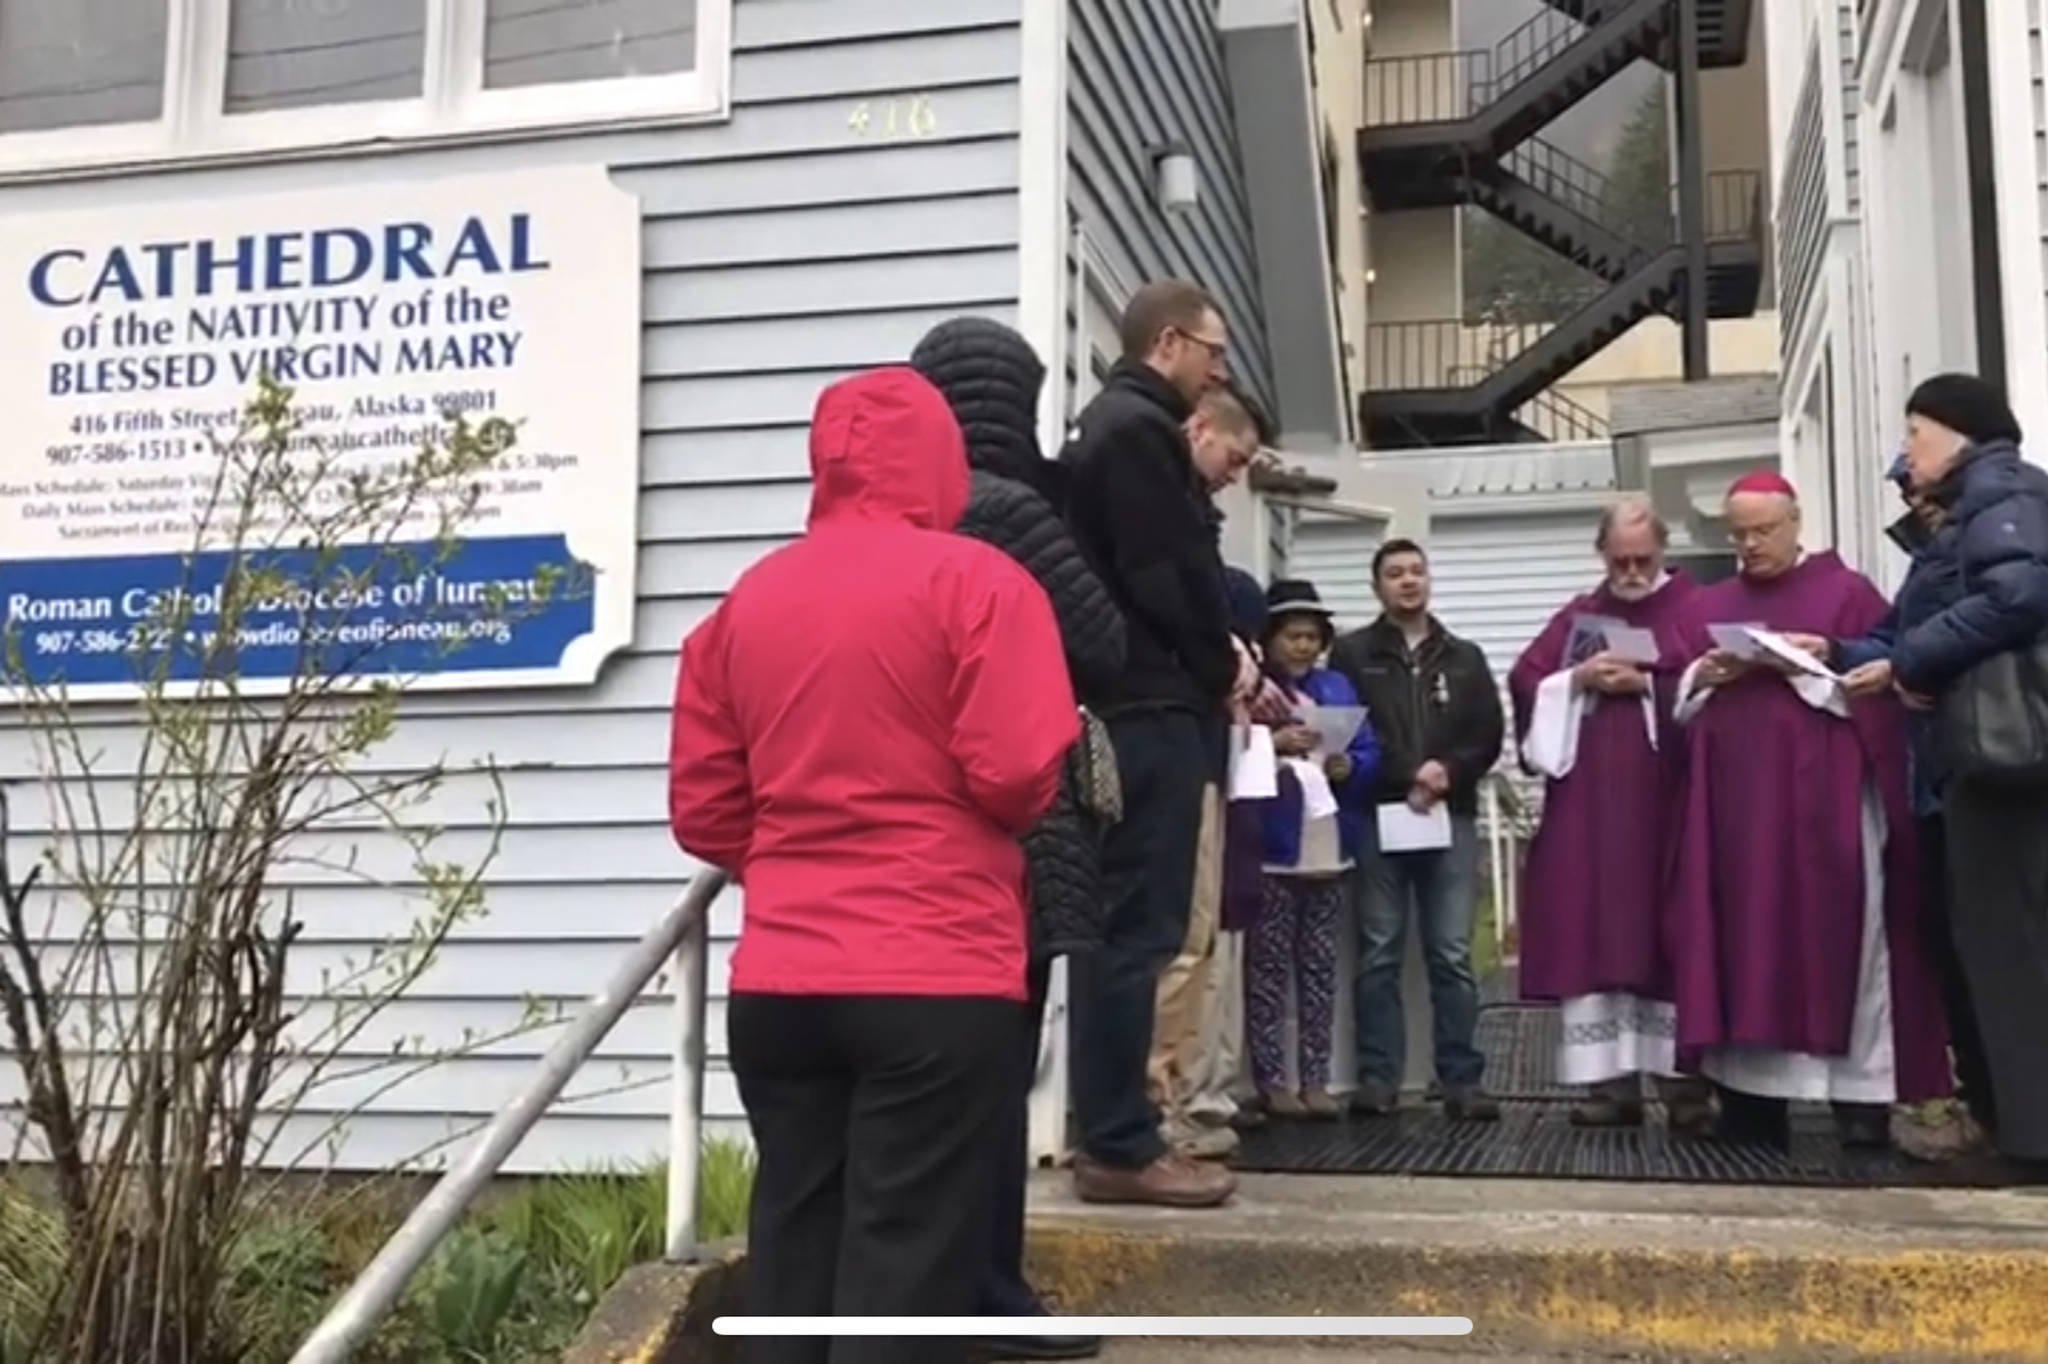 Bishop Andrew Bellisario holds a short prayer at the Cathedral of the Nativity of the Blessed Virgin Mary in downtown Juneau on Wednesday, April 17, 2019. (Michael Penn | Juneau Empire)